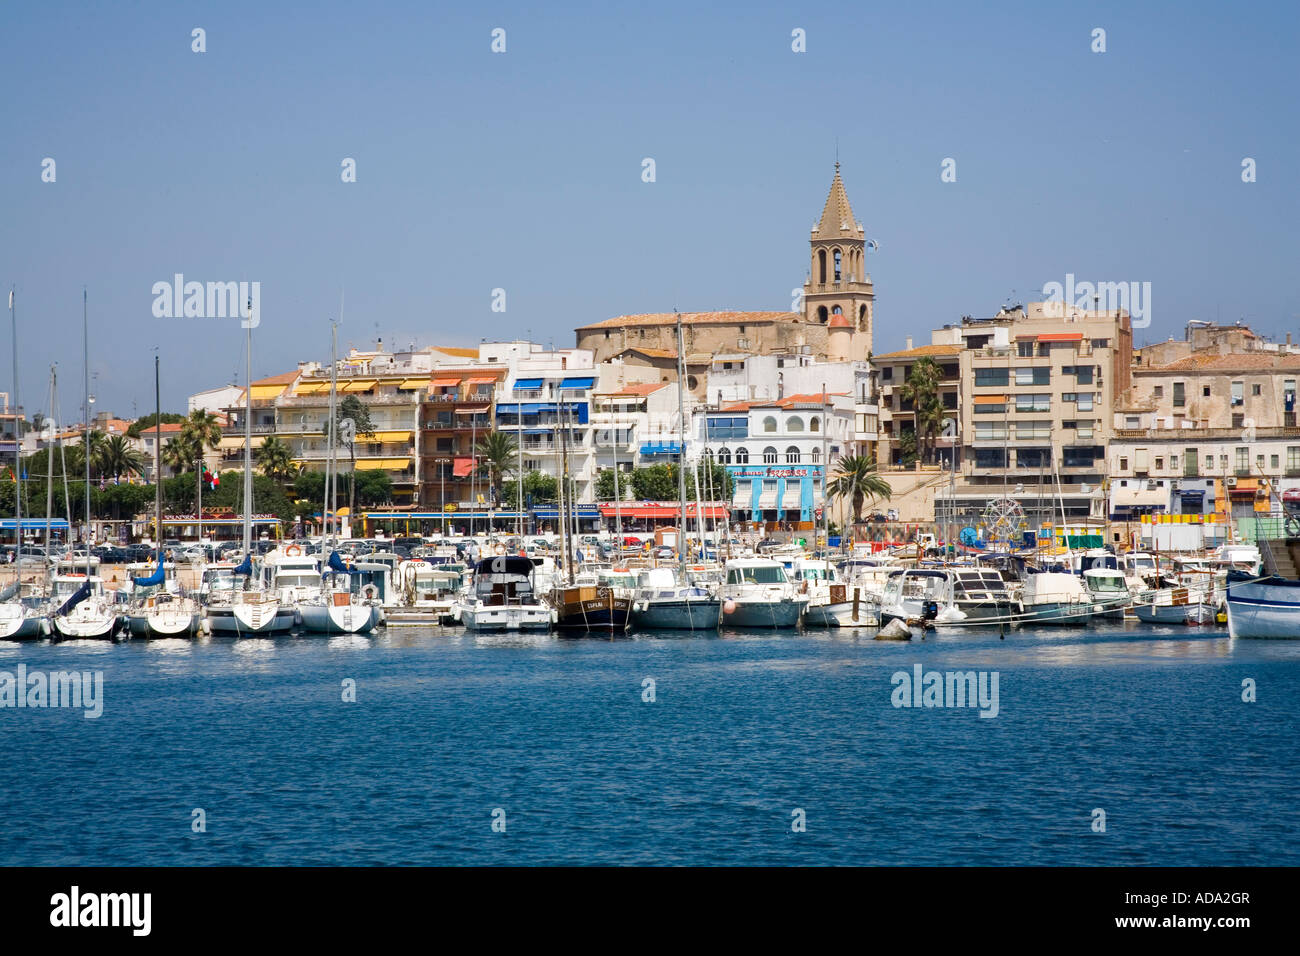 The harbour and town of Palamos on the Costa Brava in Spain Stock Photo